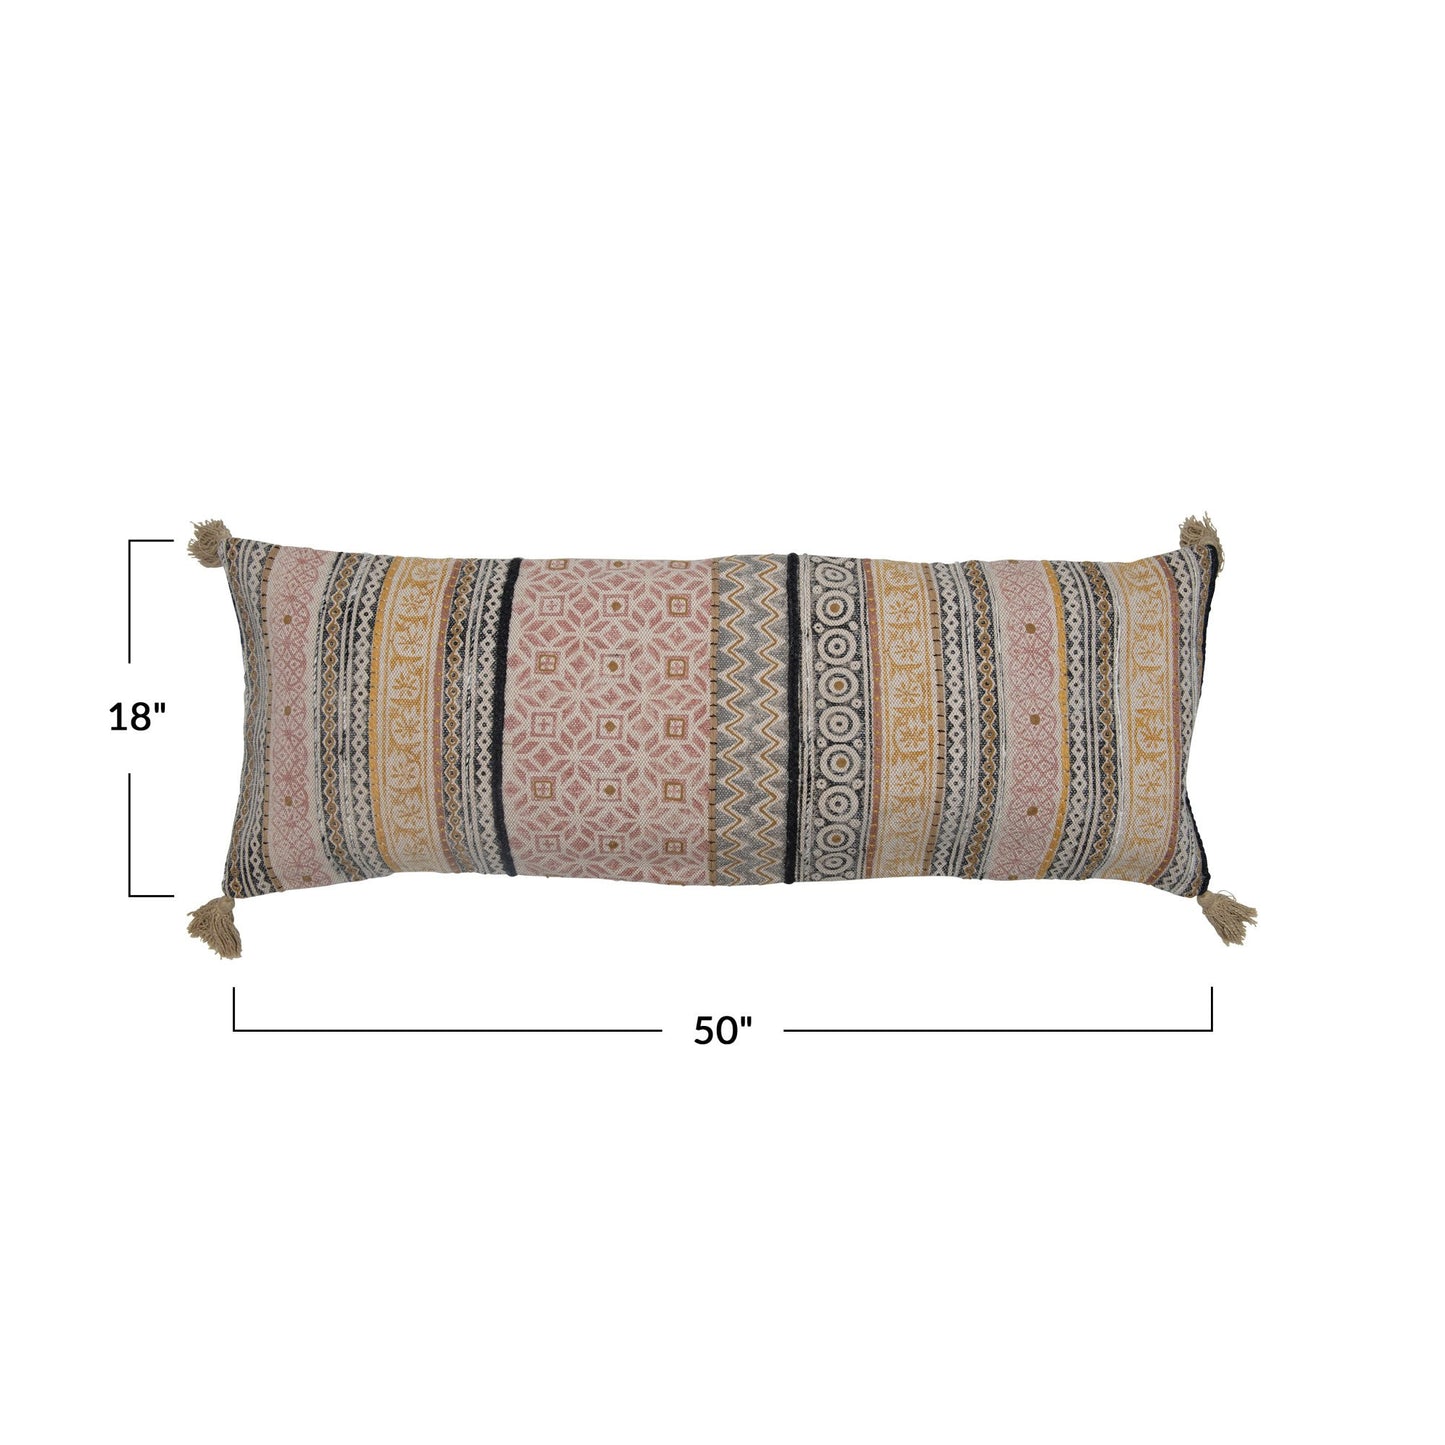 Cotton Lumbar Pillow with Embroidery and Tassels